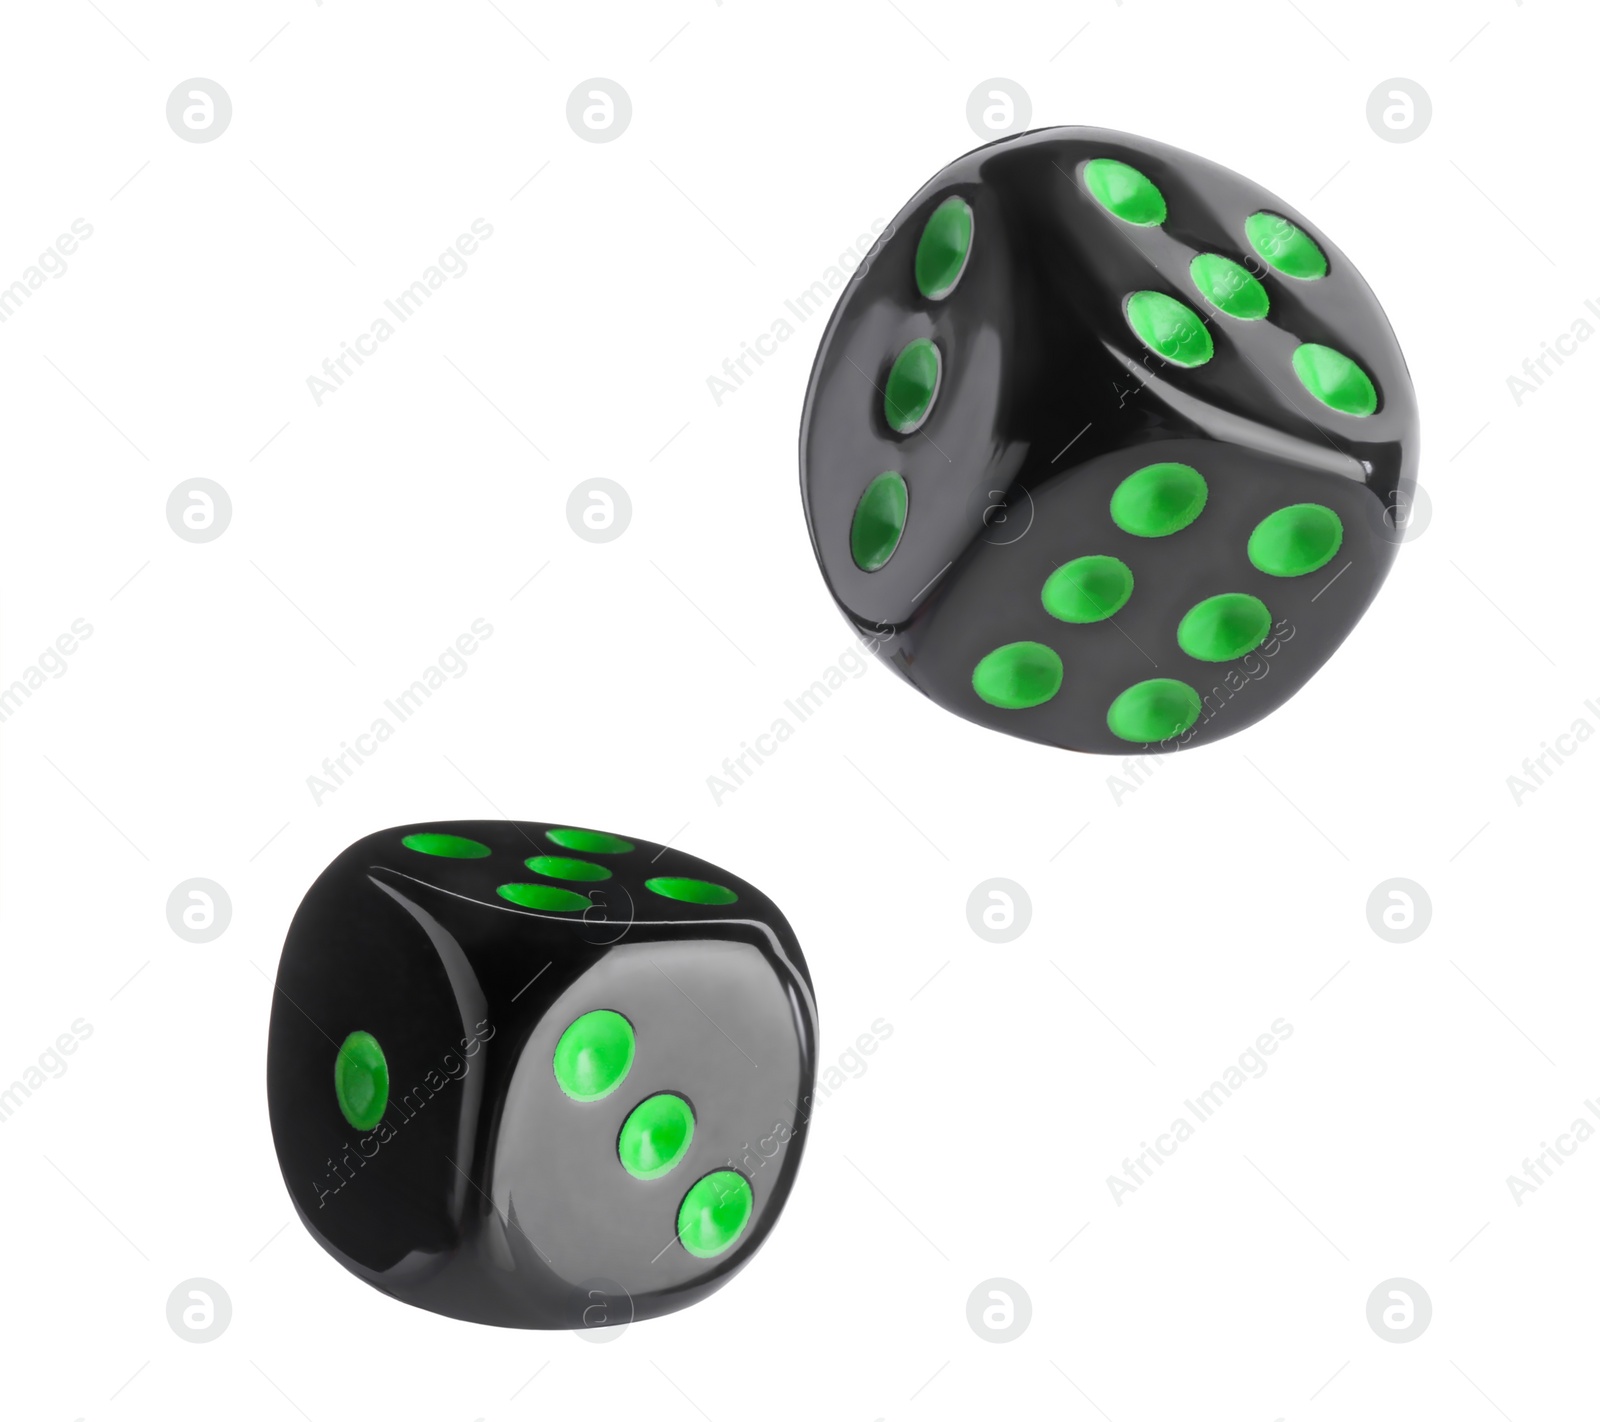 Image of Two black dice in air on white background